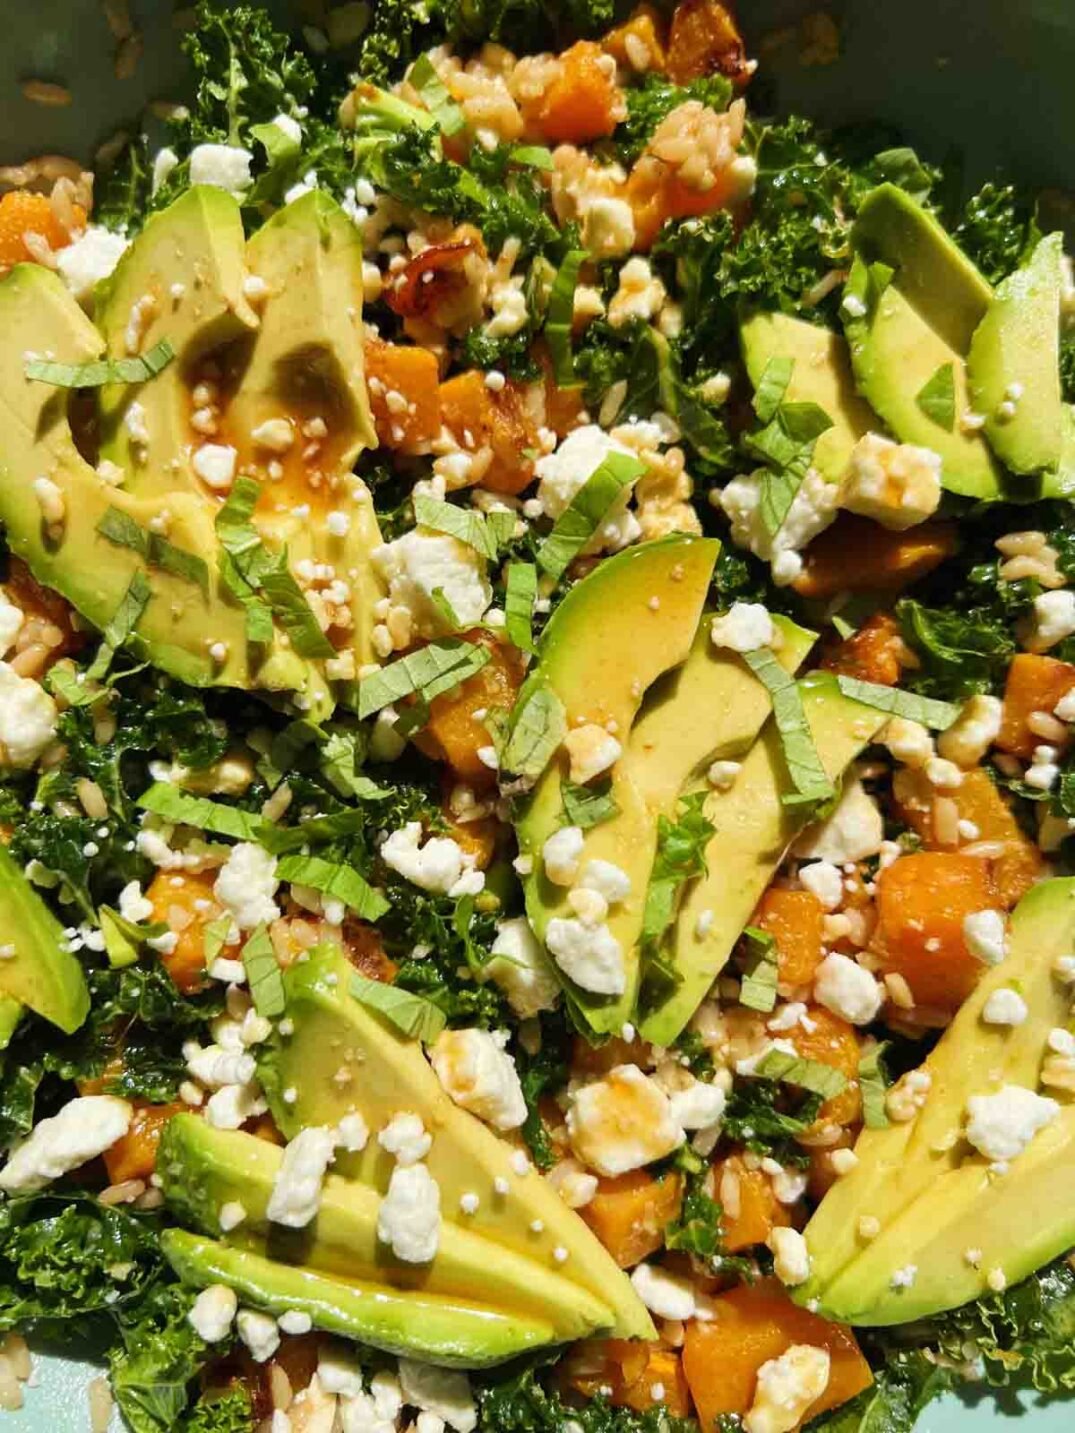 an upclose view of the ingredients in kale butternut squash salad.